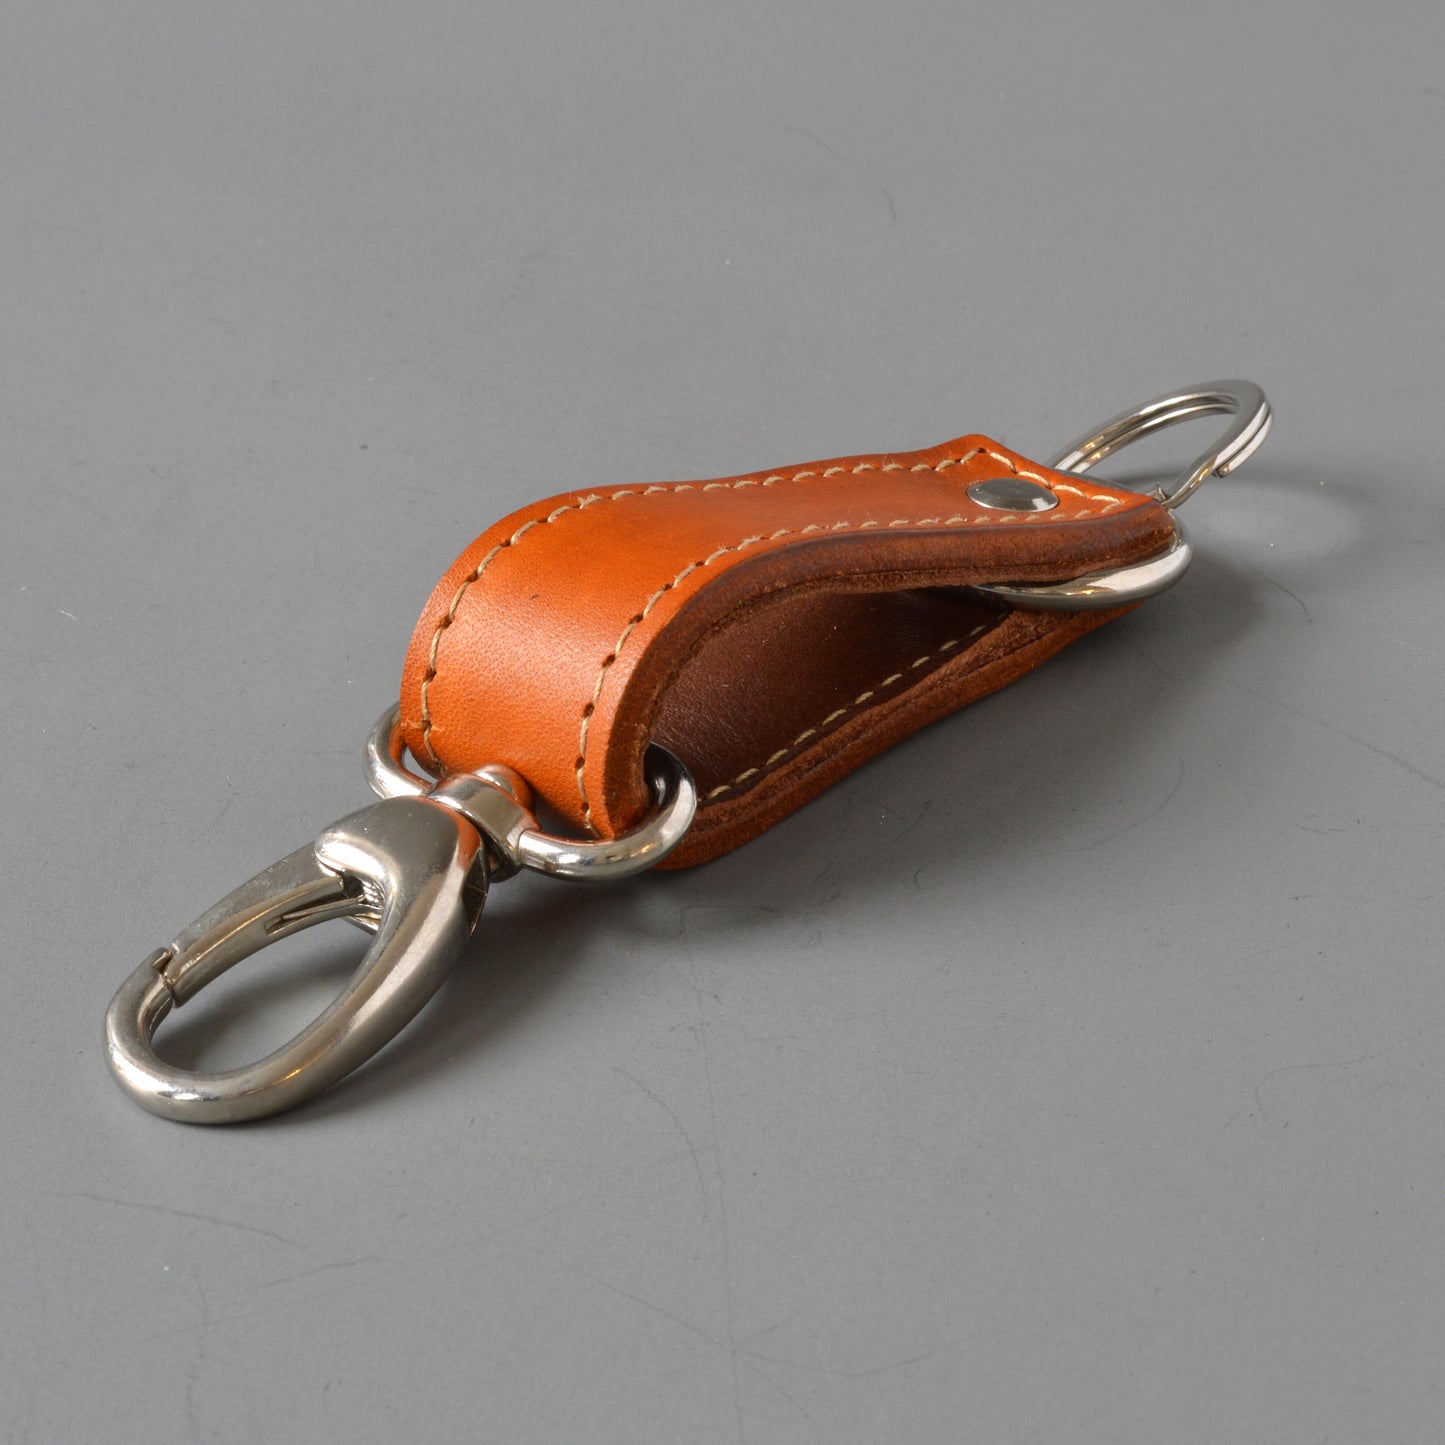 Vegetable Tanned Key Fob